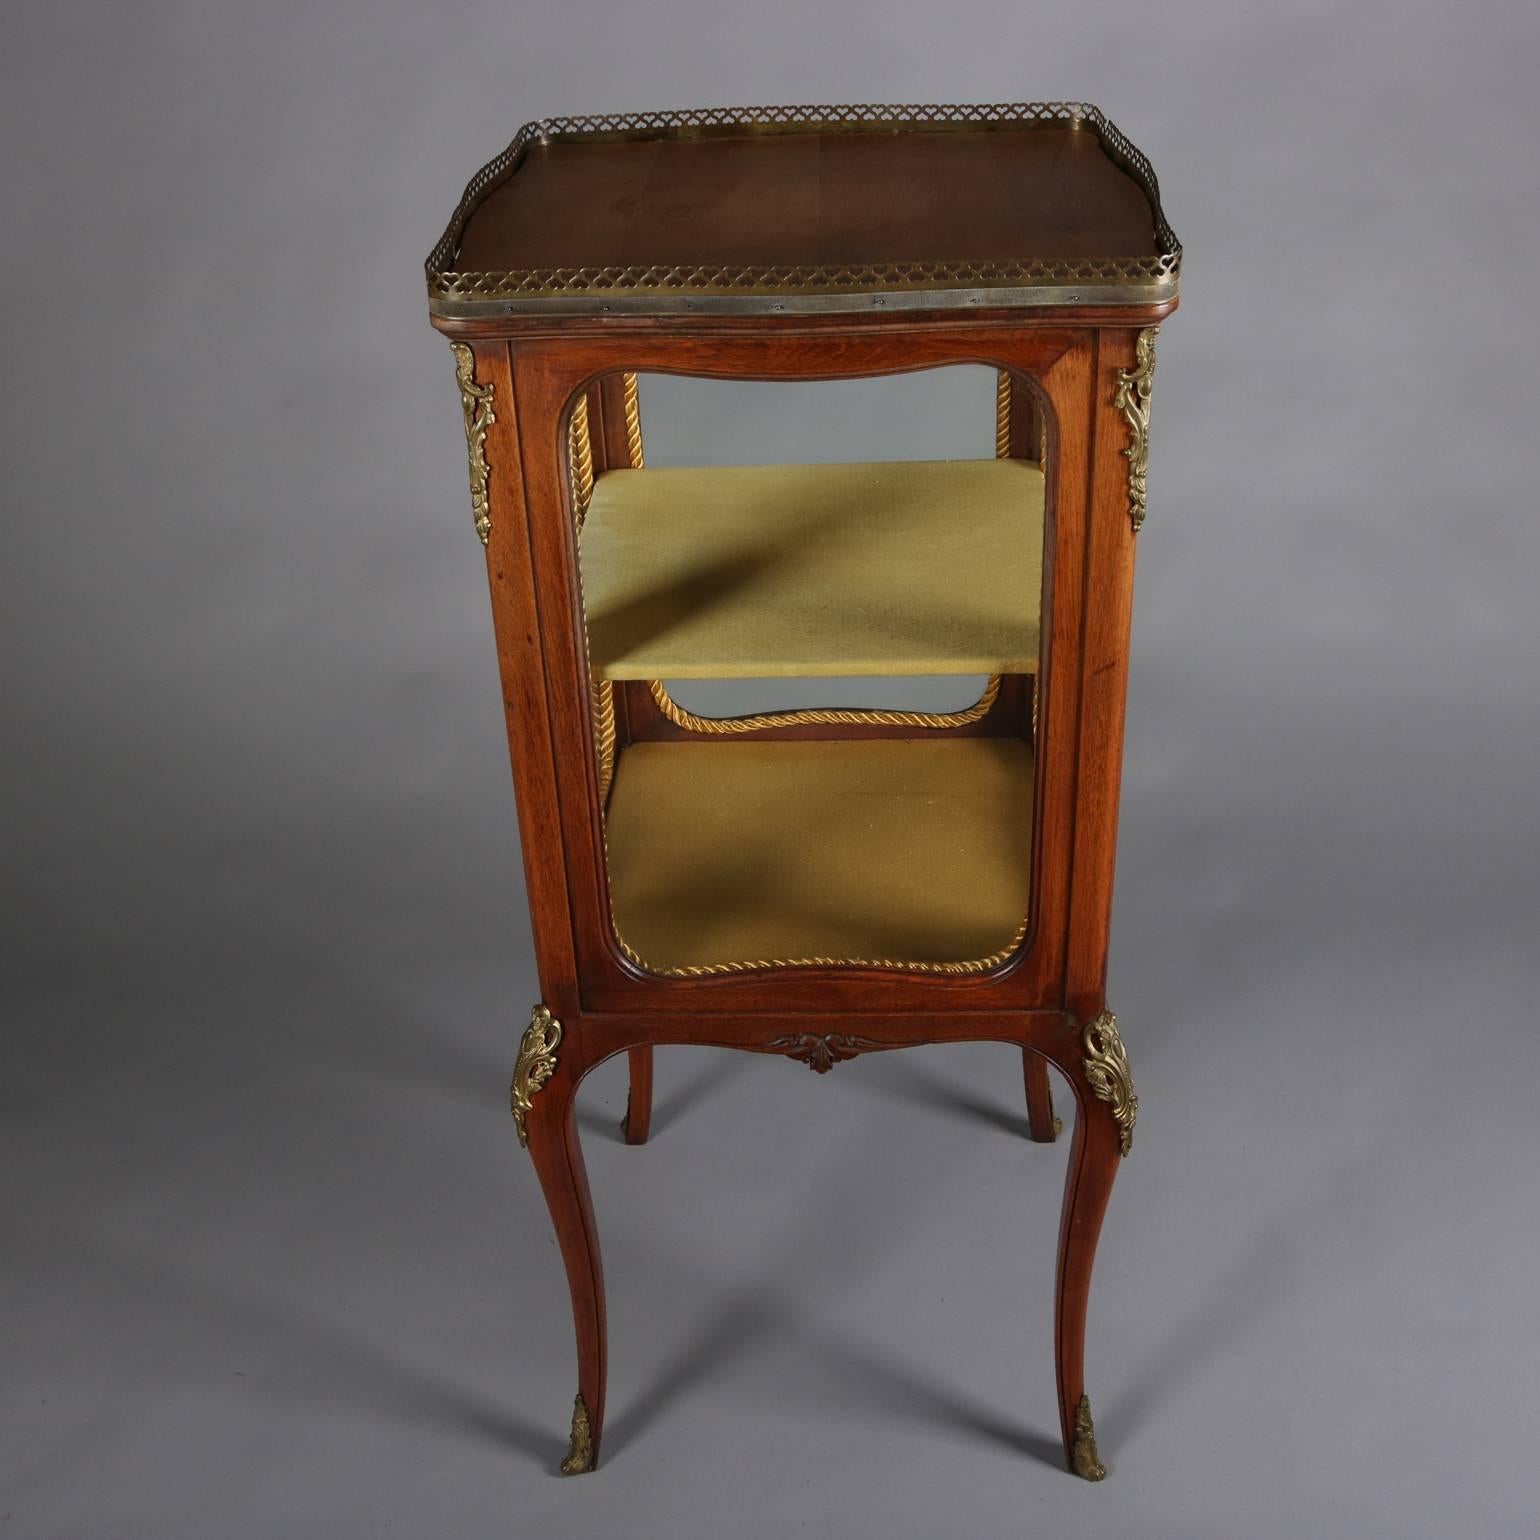 Antique petite French Louis XV style mahogany vitrine features delicate square form with foliate carved skirt and set on cabriole legs, decorated with cast foliate ormolu, pierced bronze gallery, and shelved lined interior, circa 1880.

Measures: